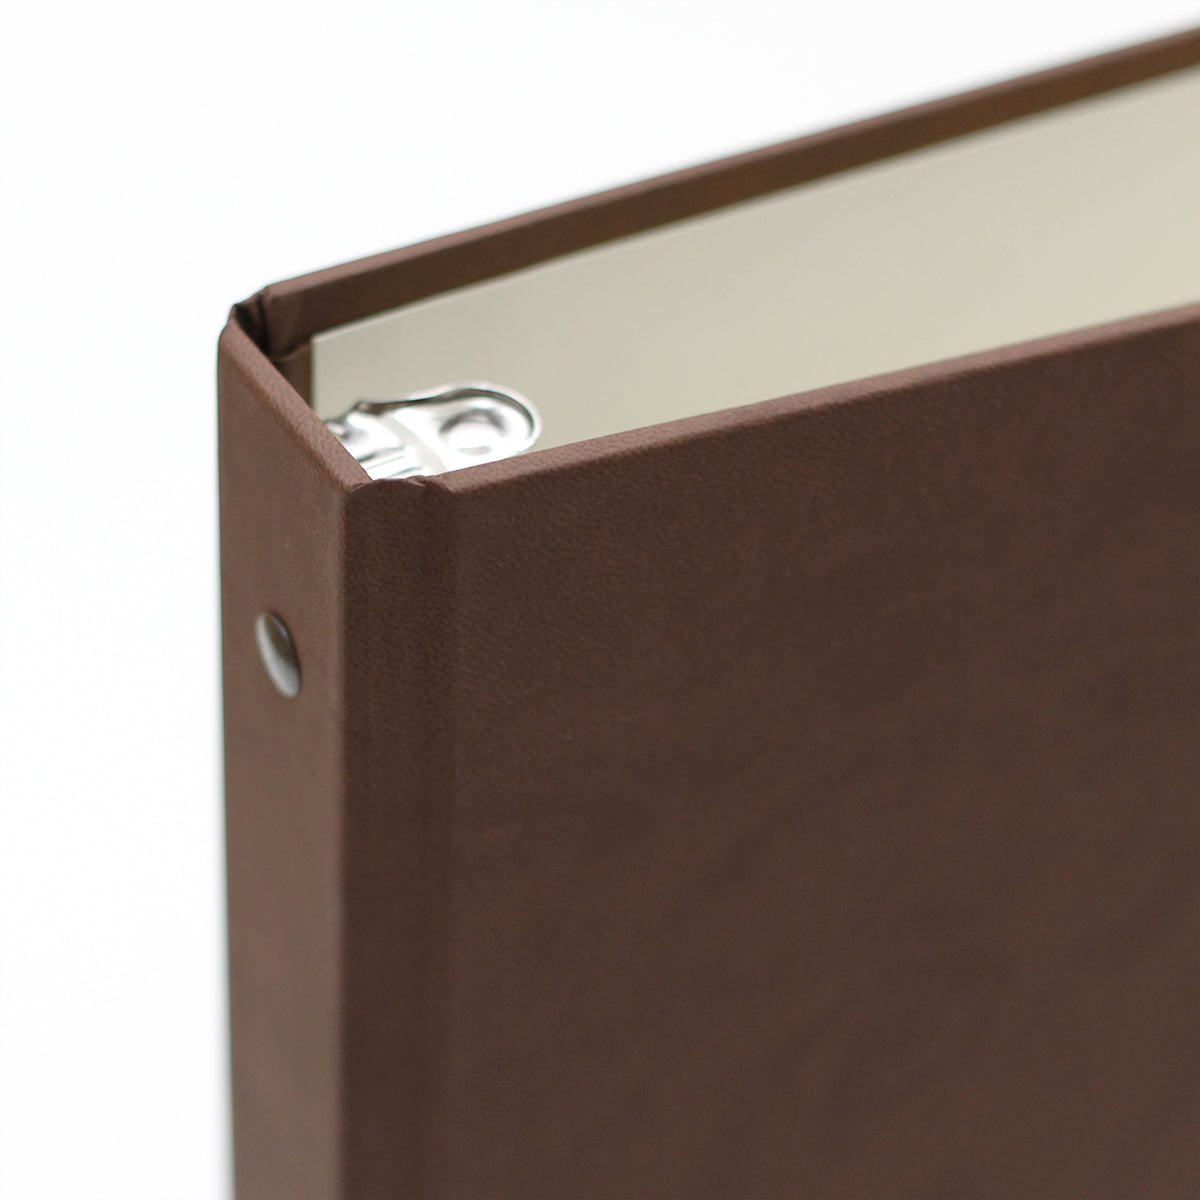 Photo Binder for 5x7 photos | Cover: Mocha Vegan Leather | Available Personalized